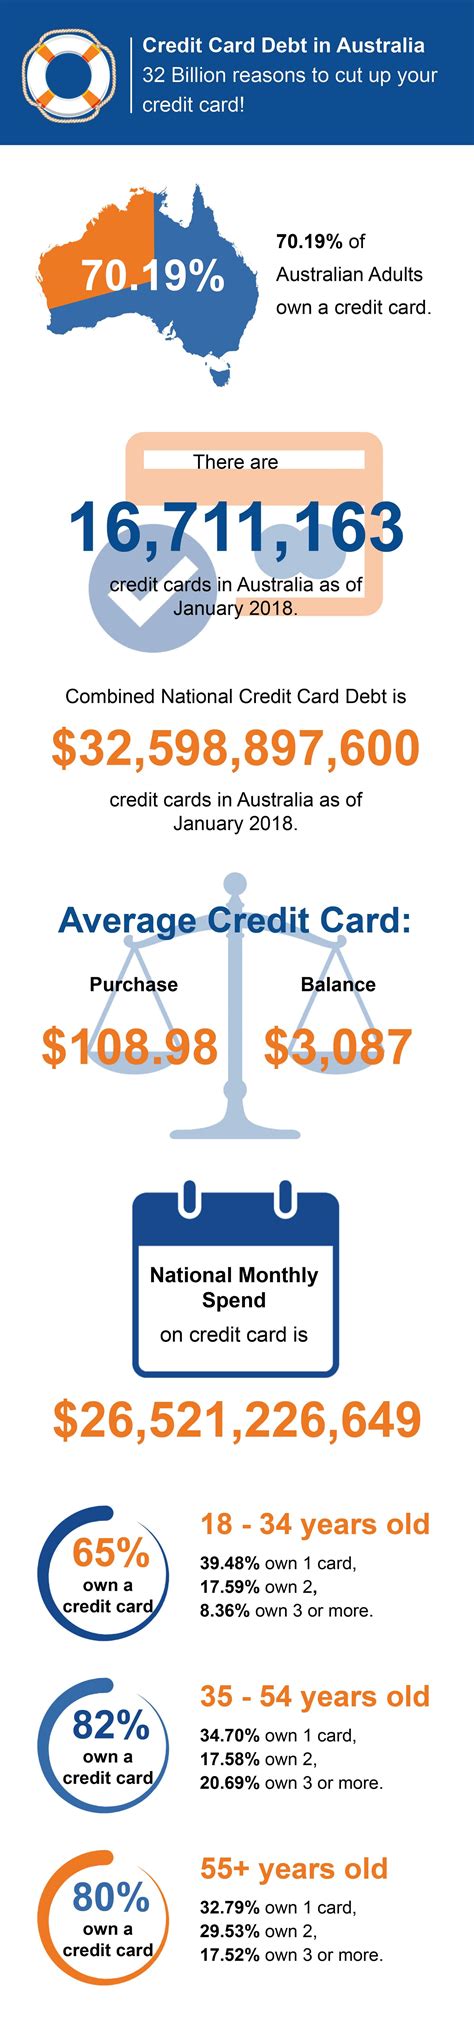 Fnb petro card (standalone only), aspire, premier, private clients and private wealth credit card holders qualify for embedded cover at no charge in the event of death or permanent disability from r1 000 to r12 000, depending on your card. Credit Card Debt in Australia: An infographic | Debt Rescue